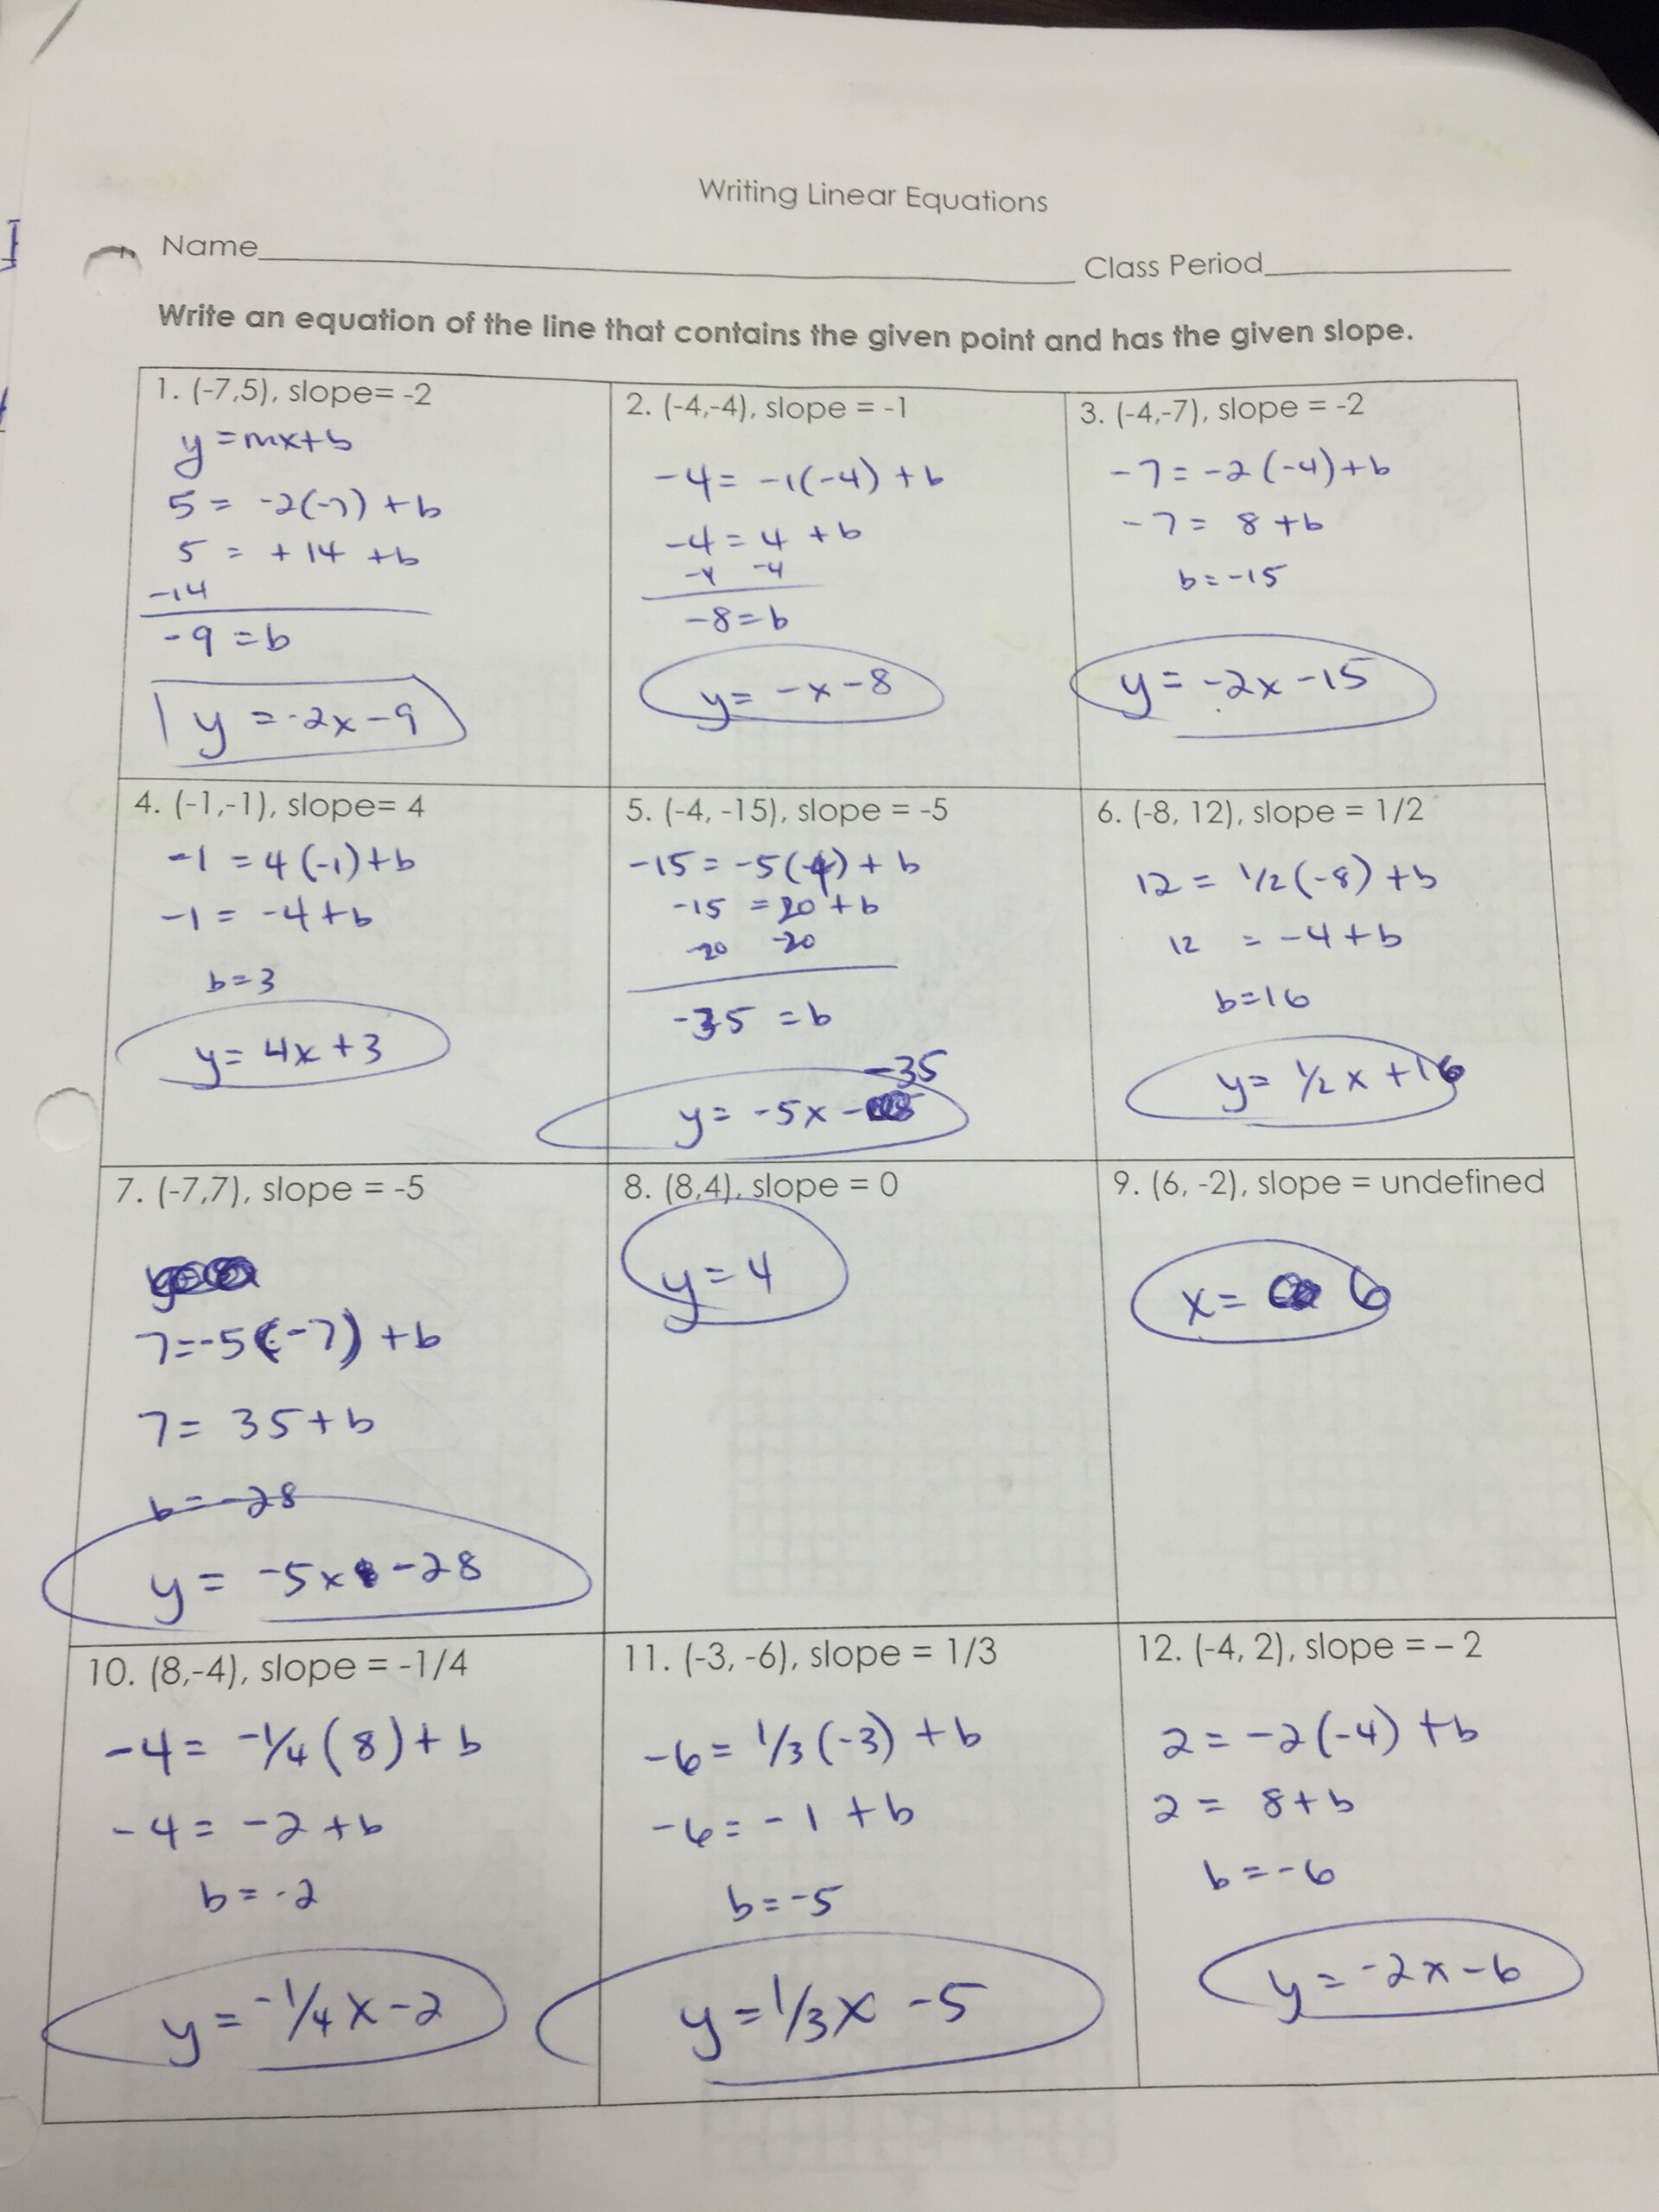 Unit 3 Relations And Functions Homework 1 Functions Answer Key